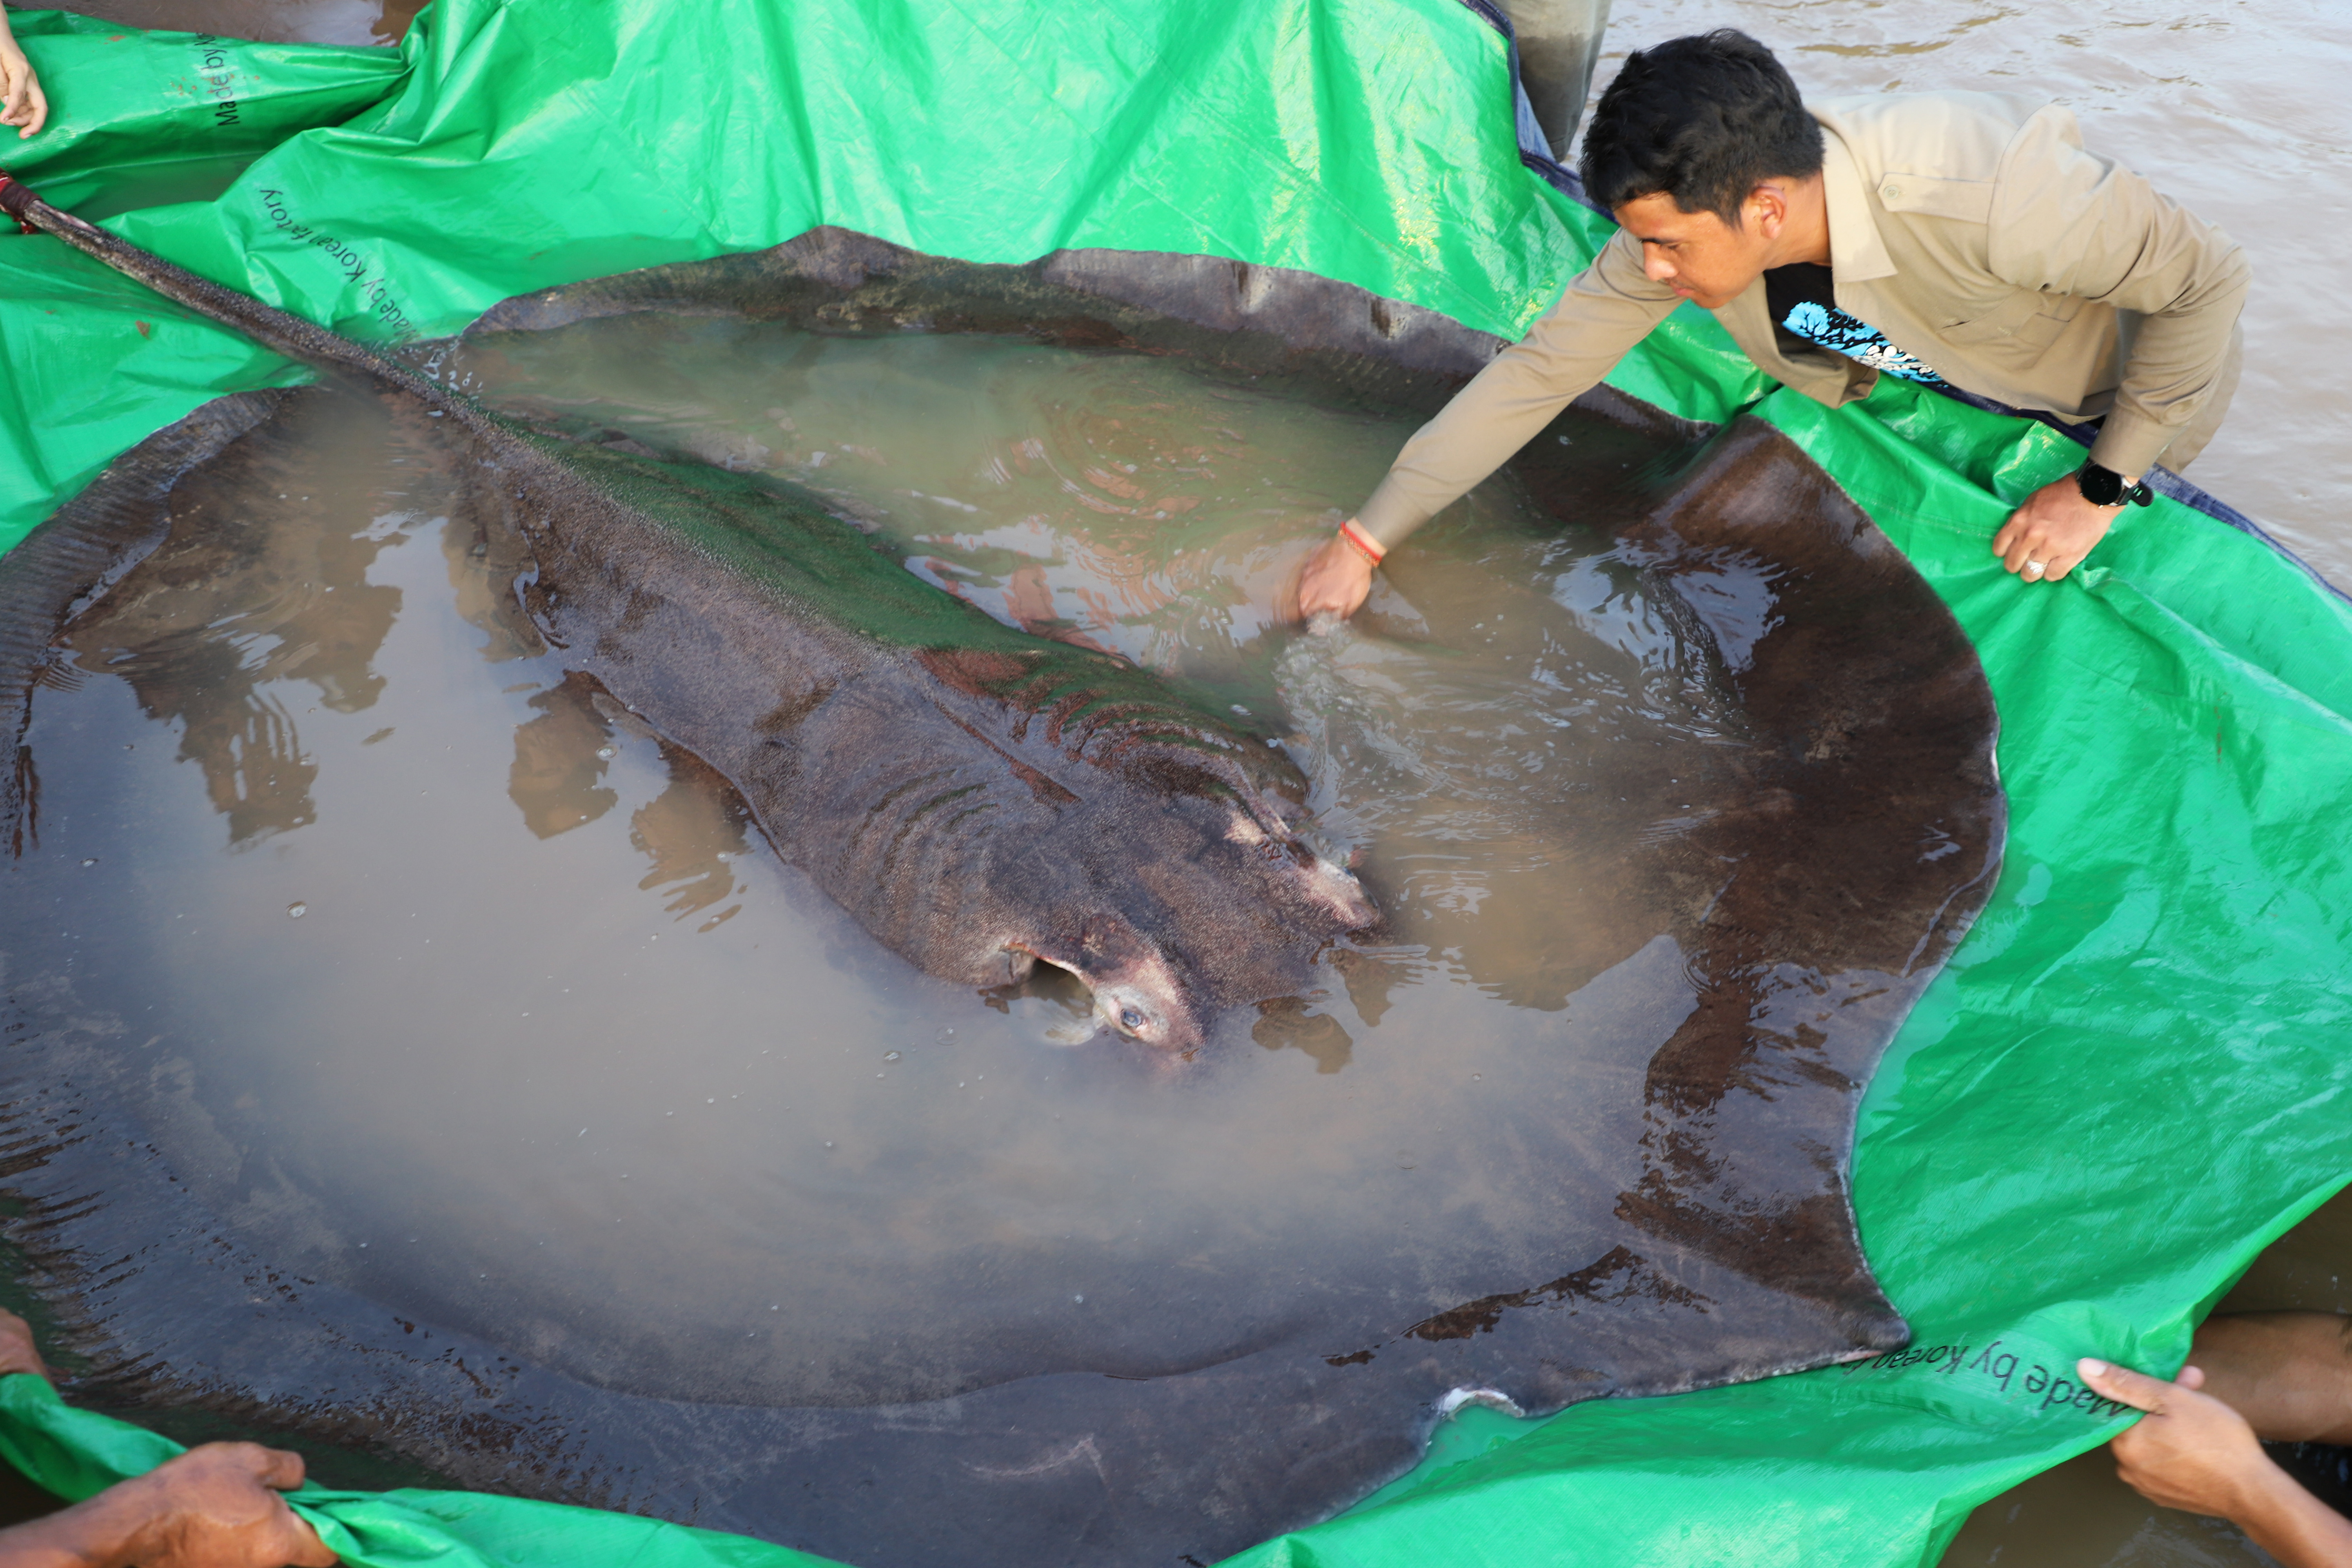 A man touches a giant freshwater stingray before it was released back into the Mekong River in the north-eastern province of Stung Treng, Cambodia